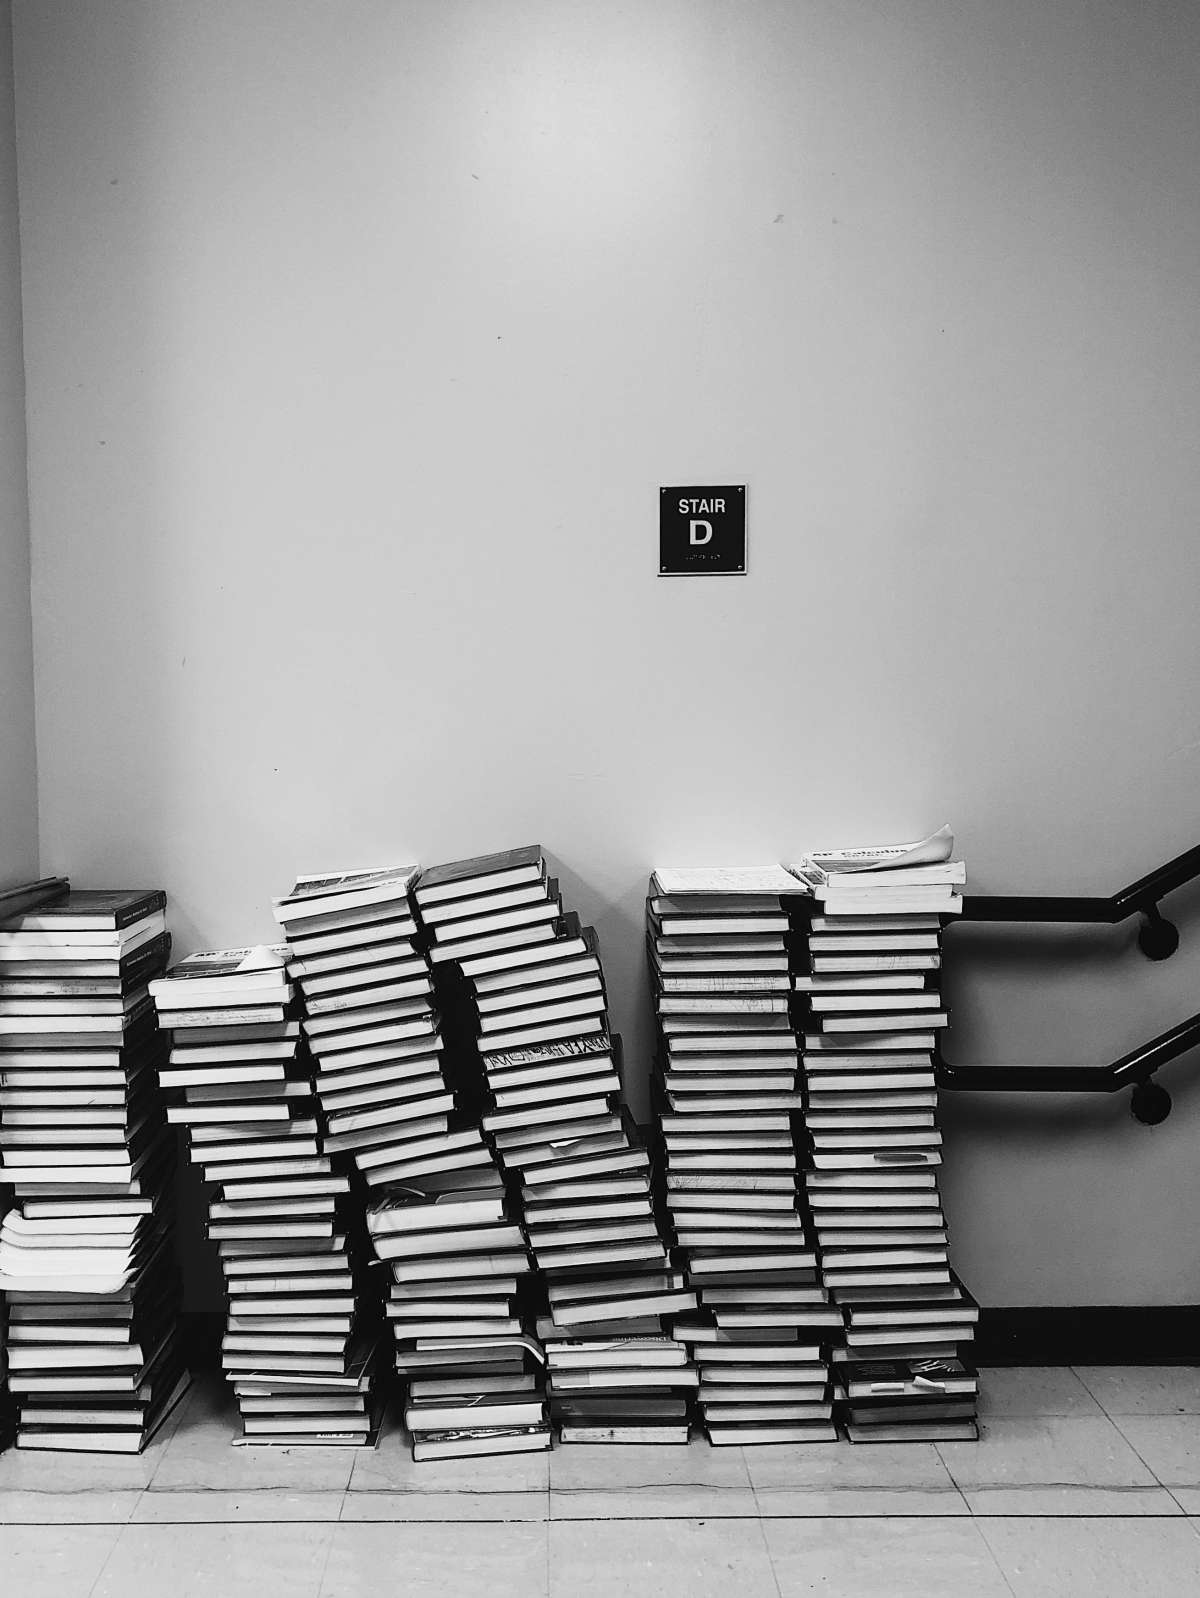 grayscale photography of pile of books